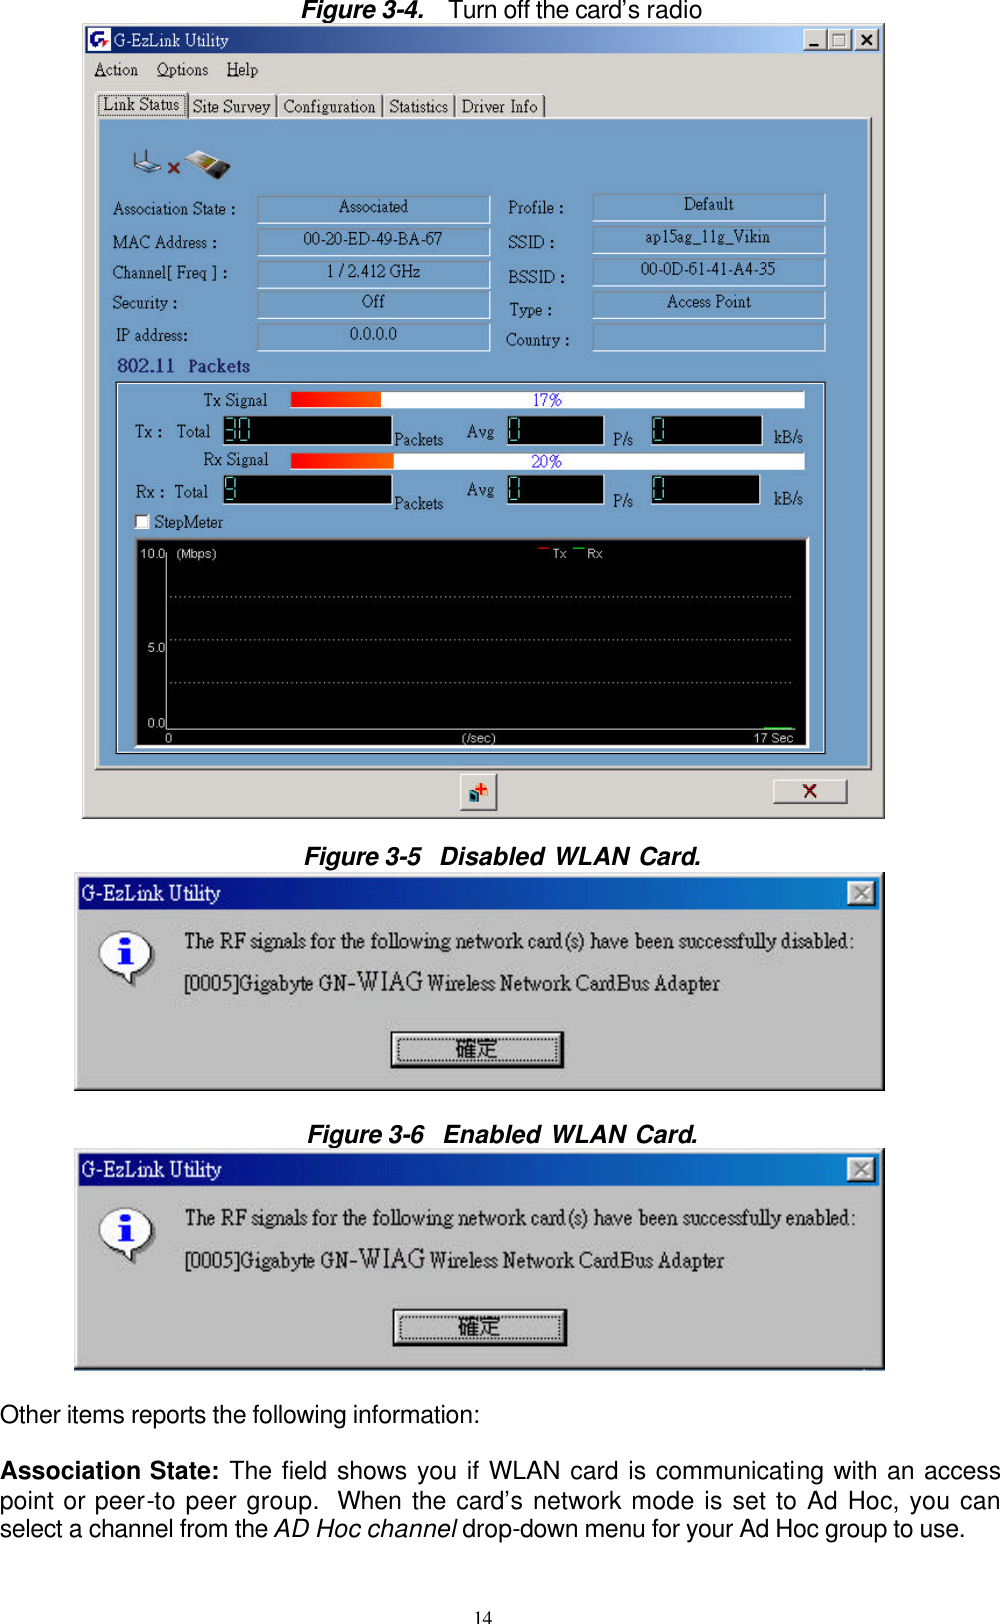 14  Figure 3-4.  Turn off the card’s radio   Figure 3-5  Disabled WLAN Card.          Figure 3-6  Enabled WLAN Card.          Other items reports the following information:  Association State: The field shows you if WLAN card is communicating with an access point or peer-to peer group. When the card’s network mode is set to Ad Hoc, you can select a channel from the AD Hoc channel drop-down menu for your Ad Hoc group to use. 